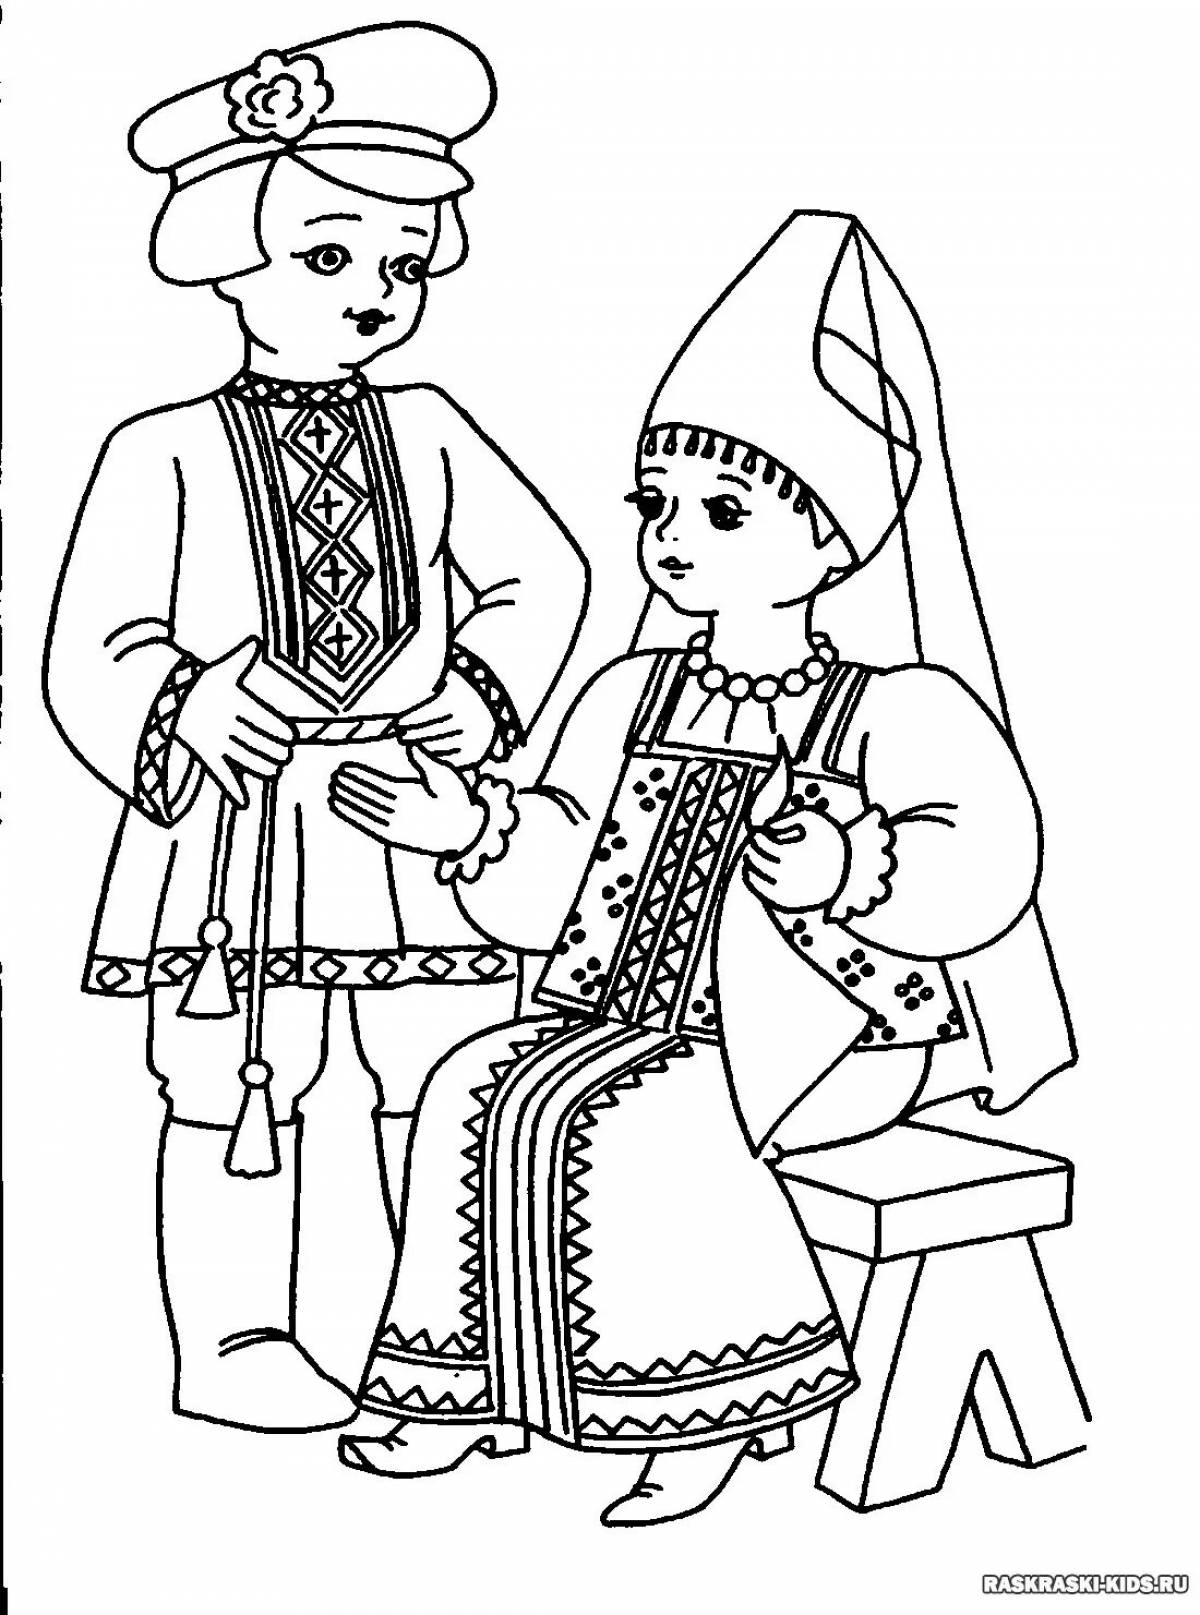 Coloring page majestic Russian costume